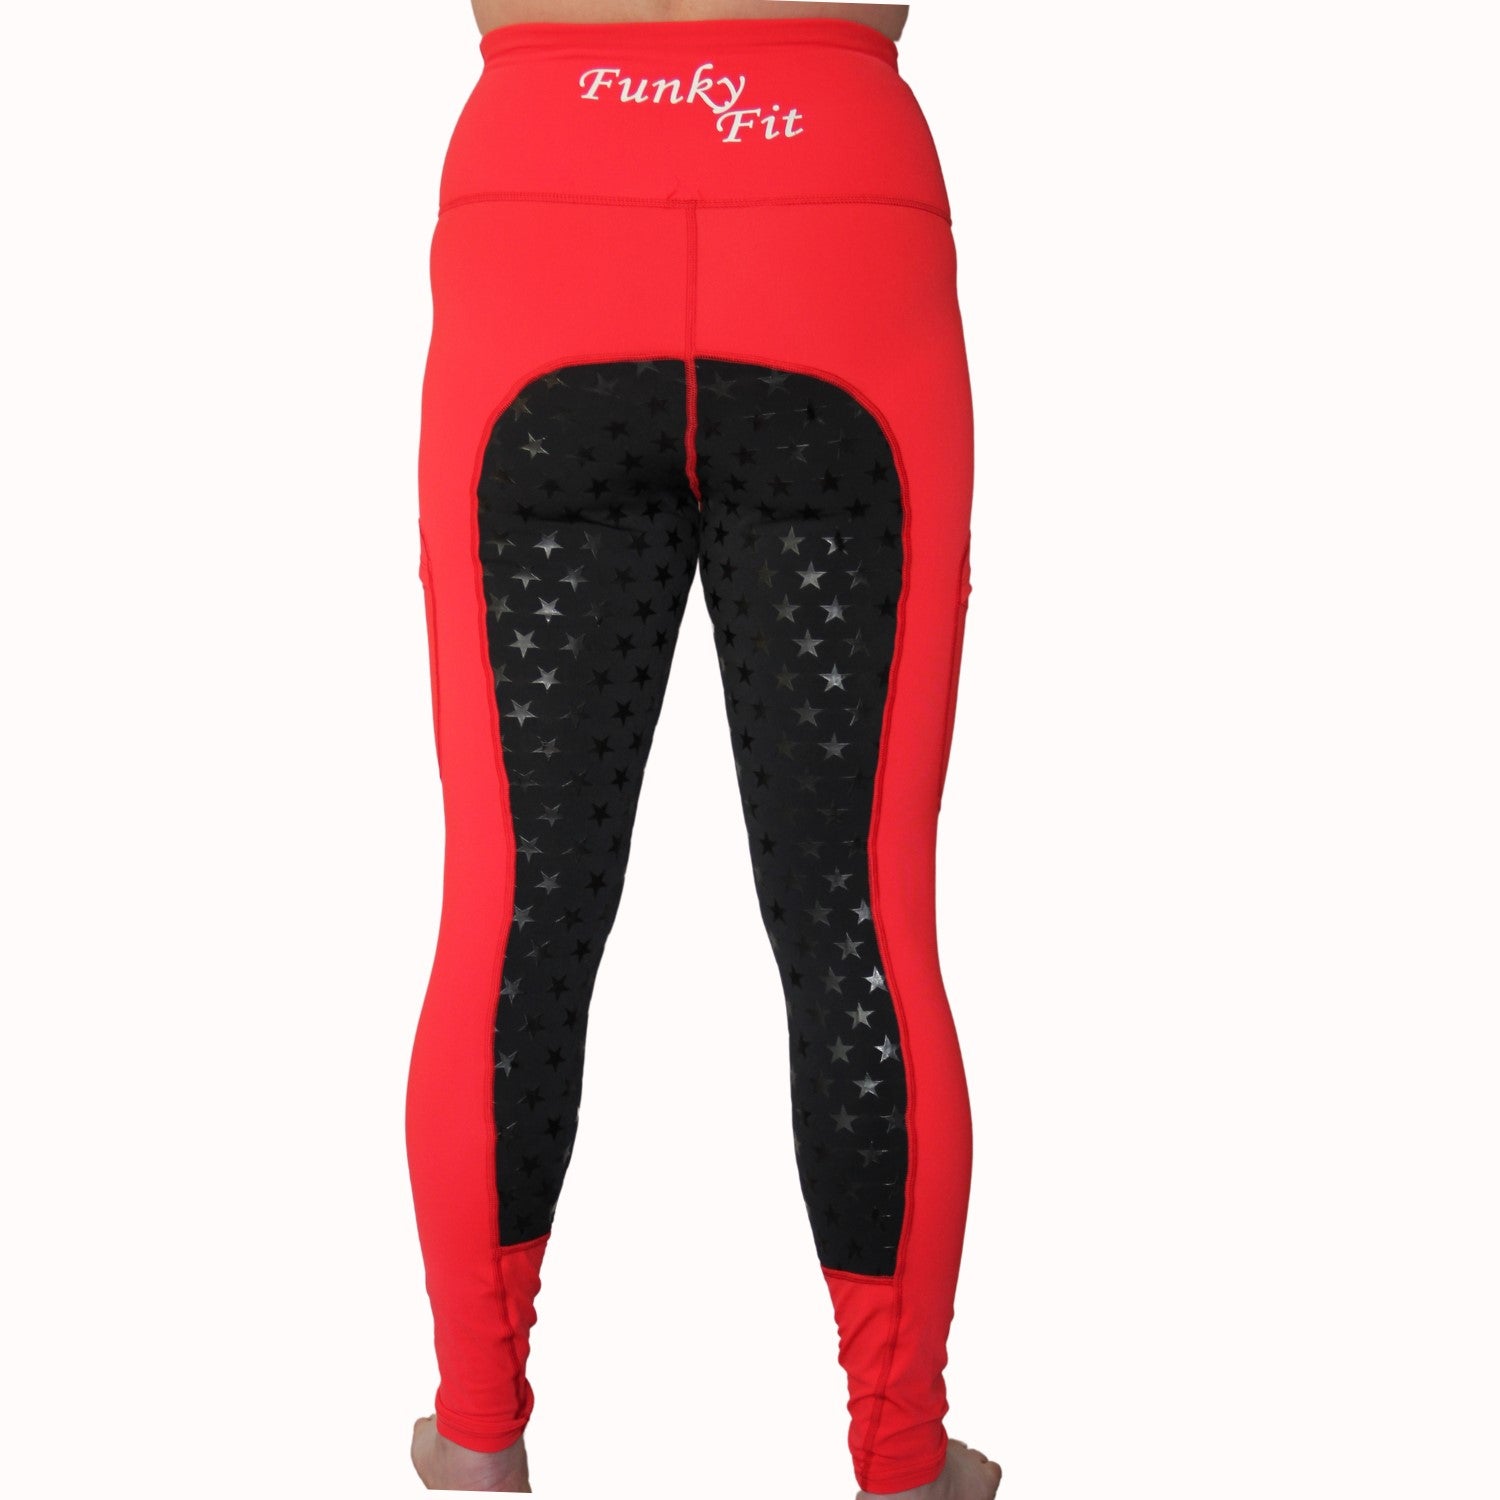 Funky Fit Equestrian Winter Lined Jodphurs - Red